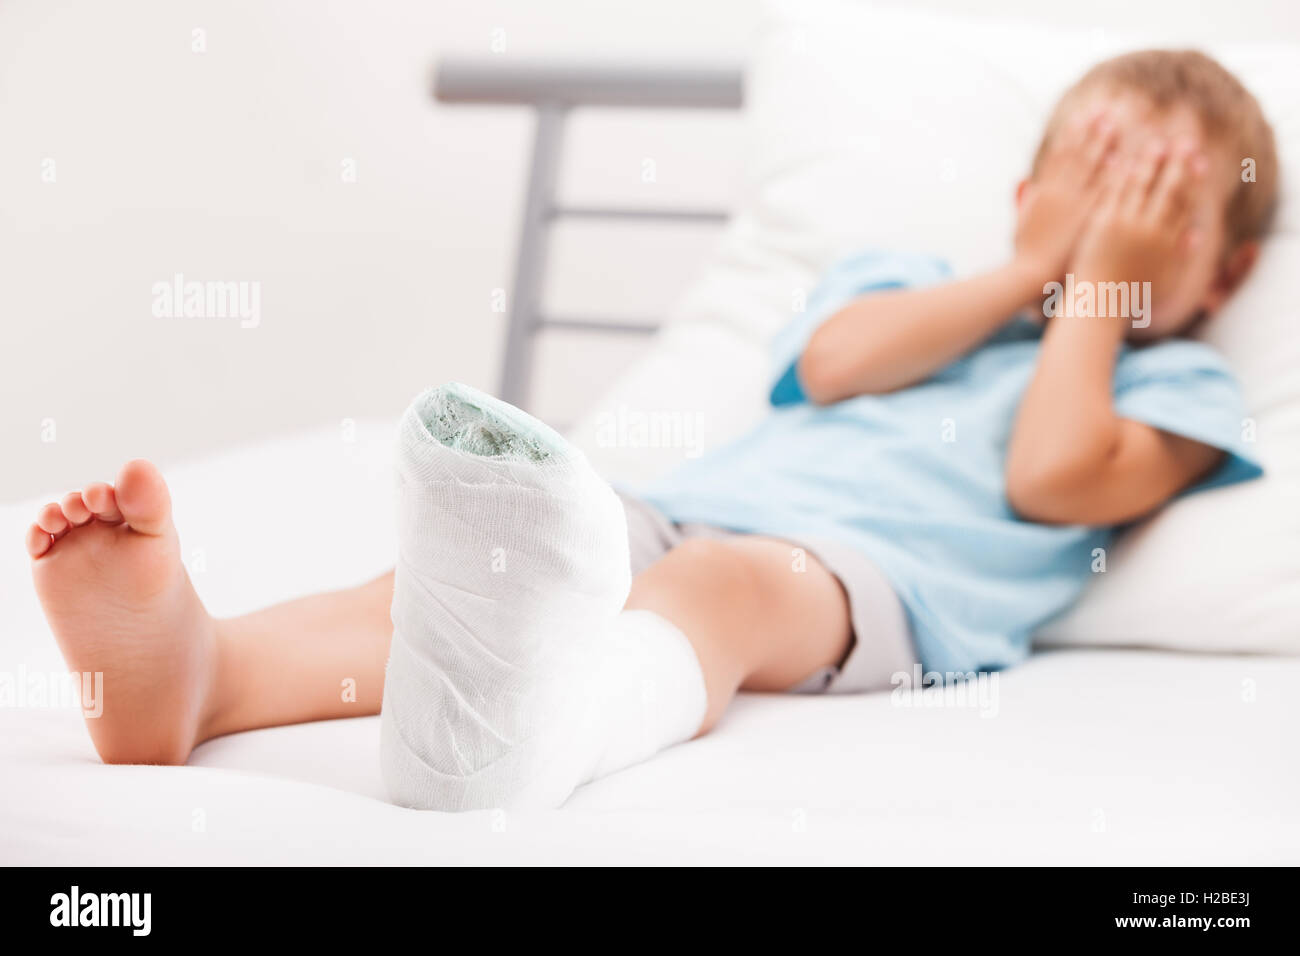 Little child boy with plaster bandage on leg heel fracture or br Stock Photo